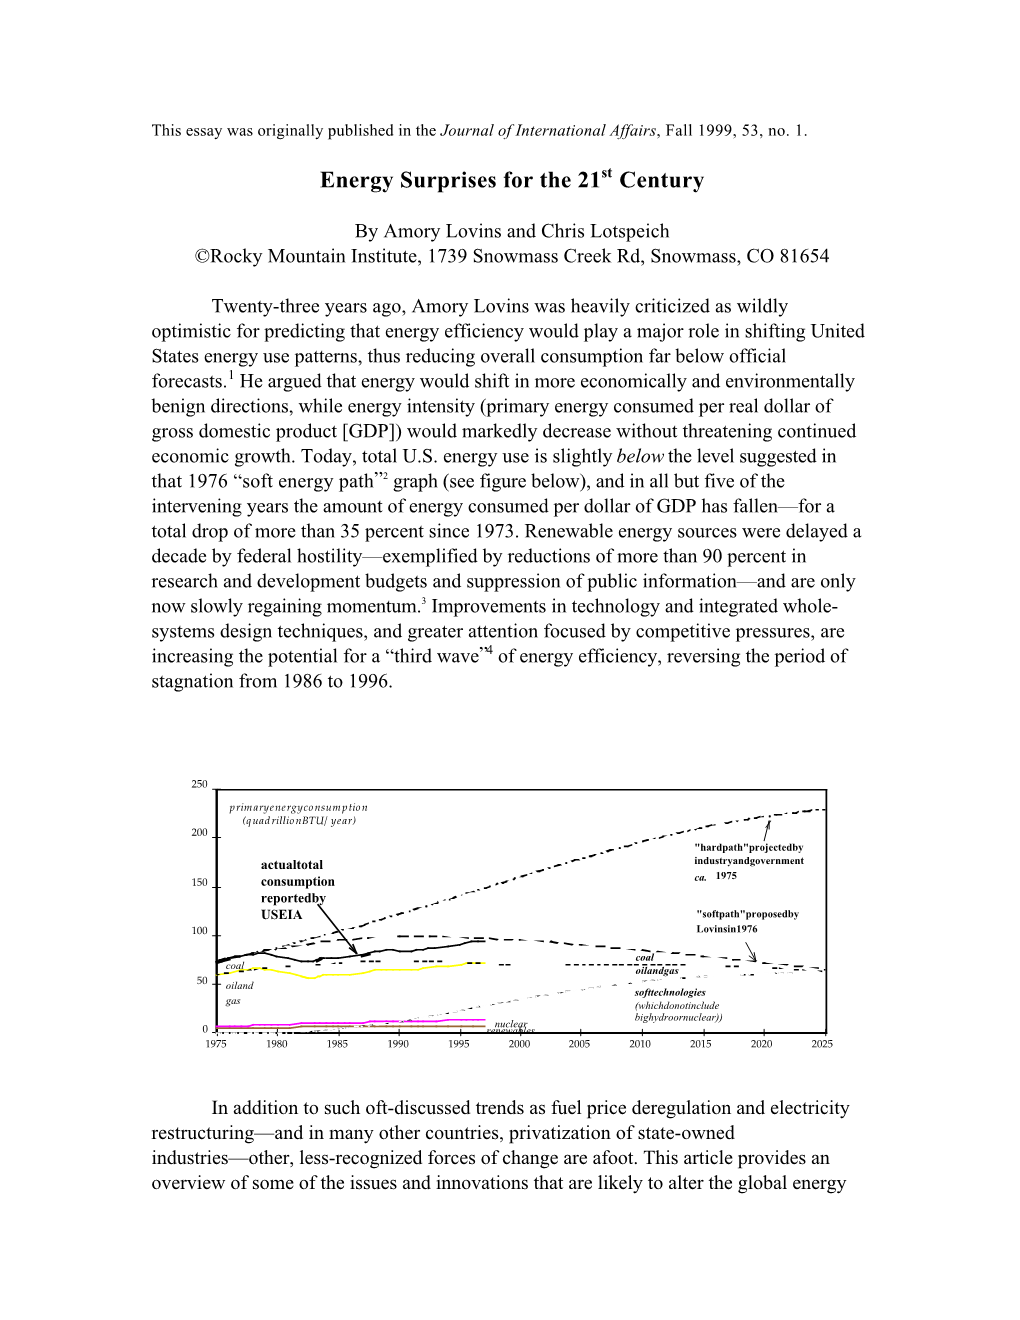 Energy Surprises for the 21St Century